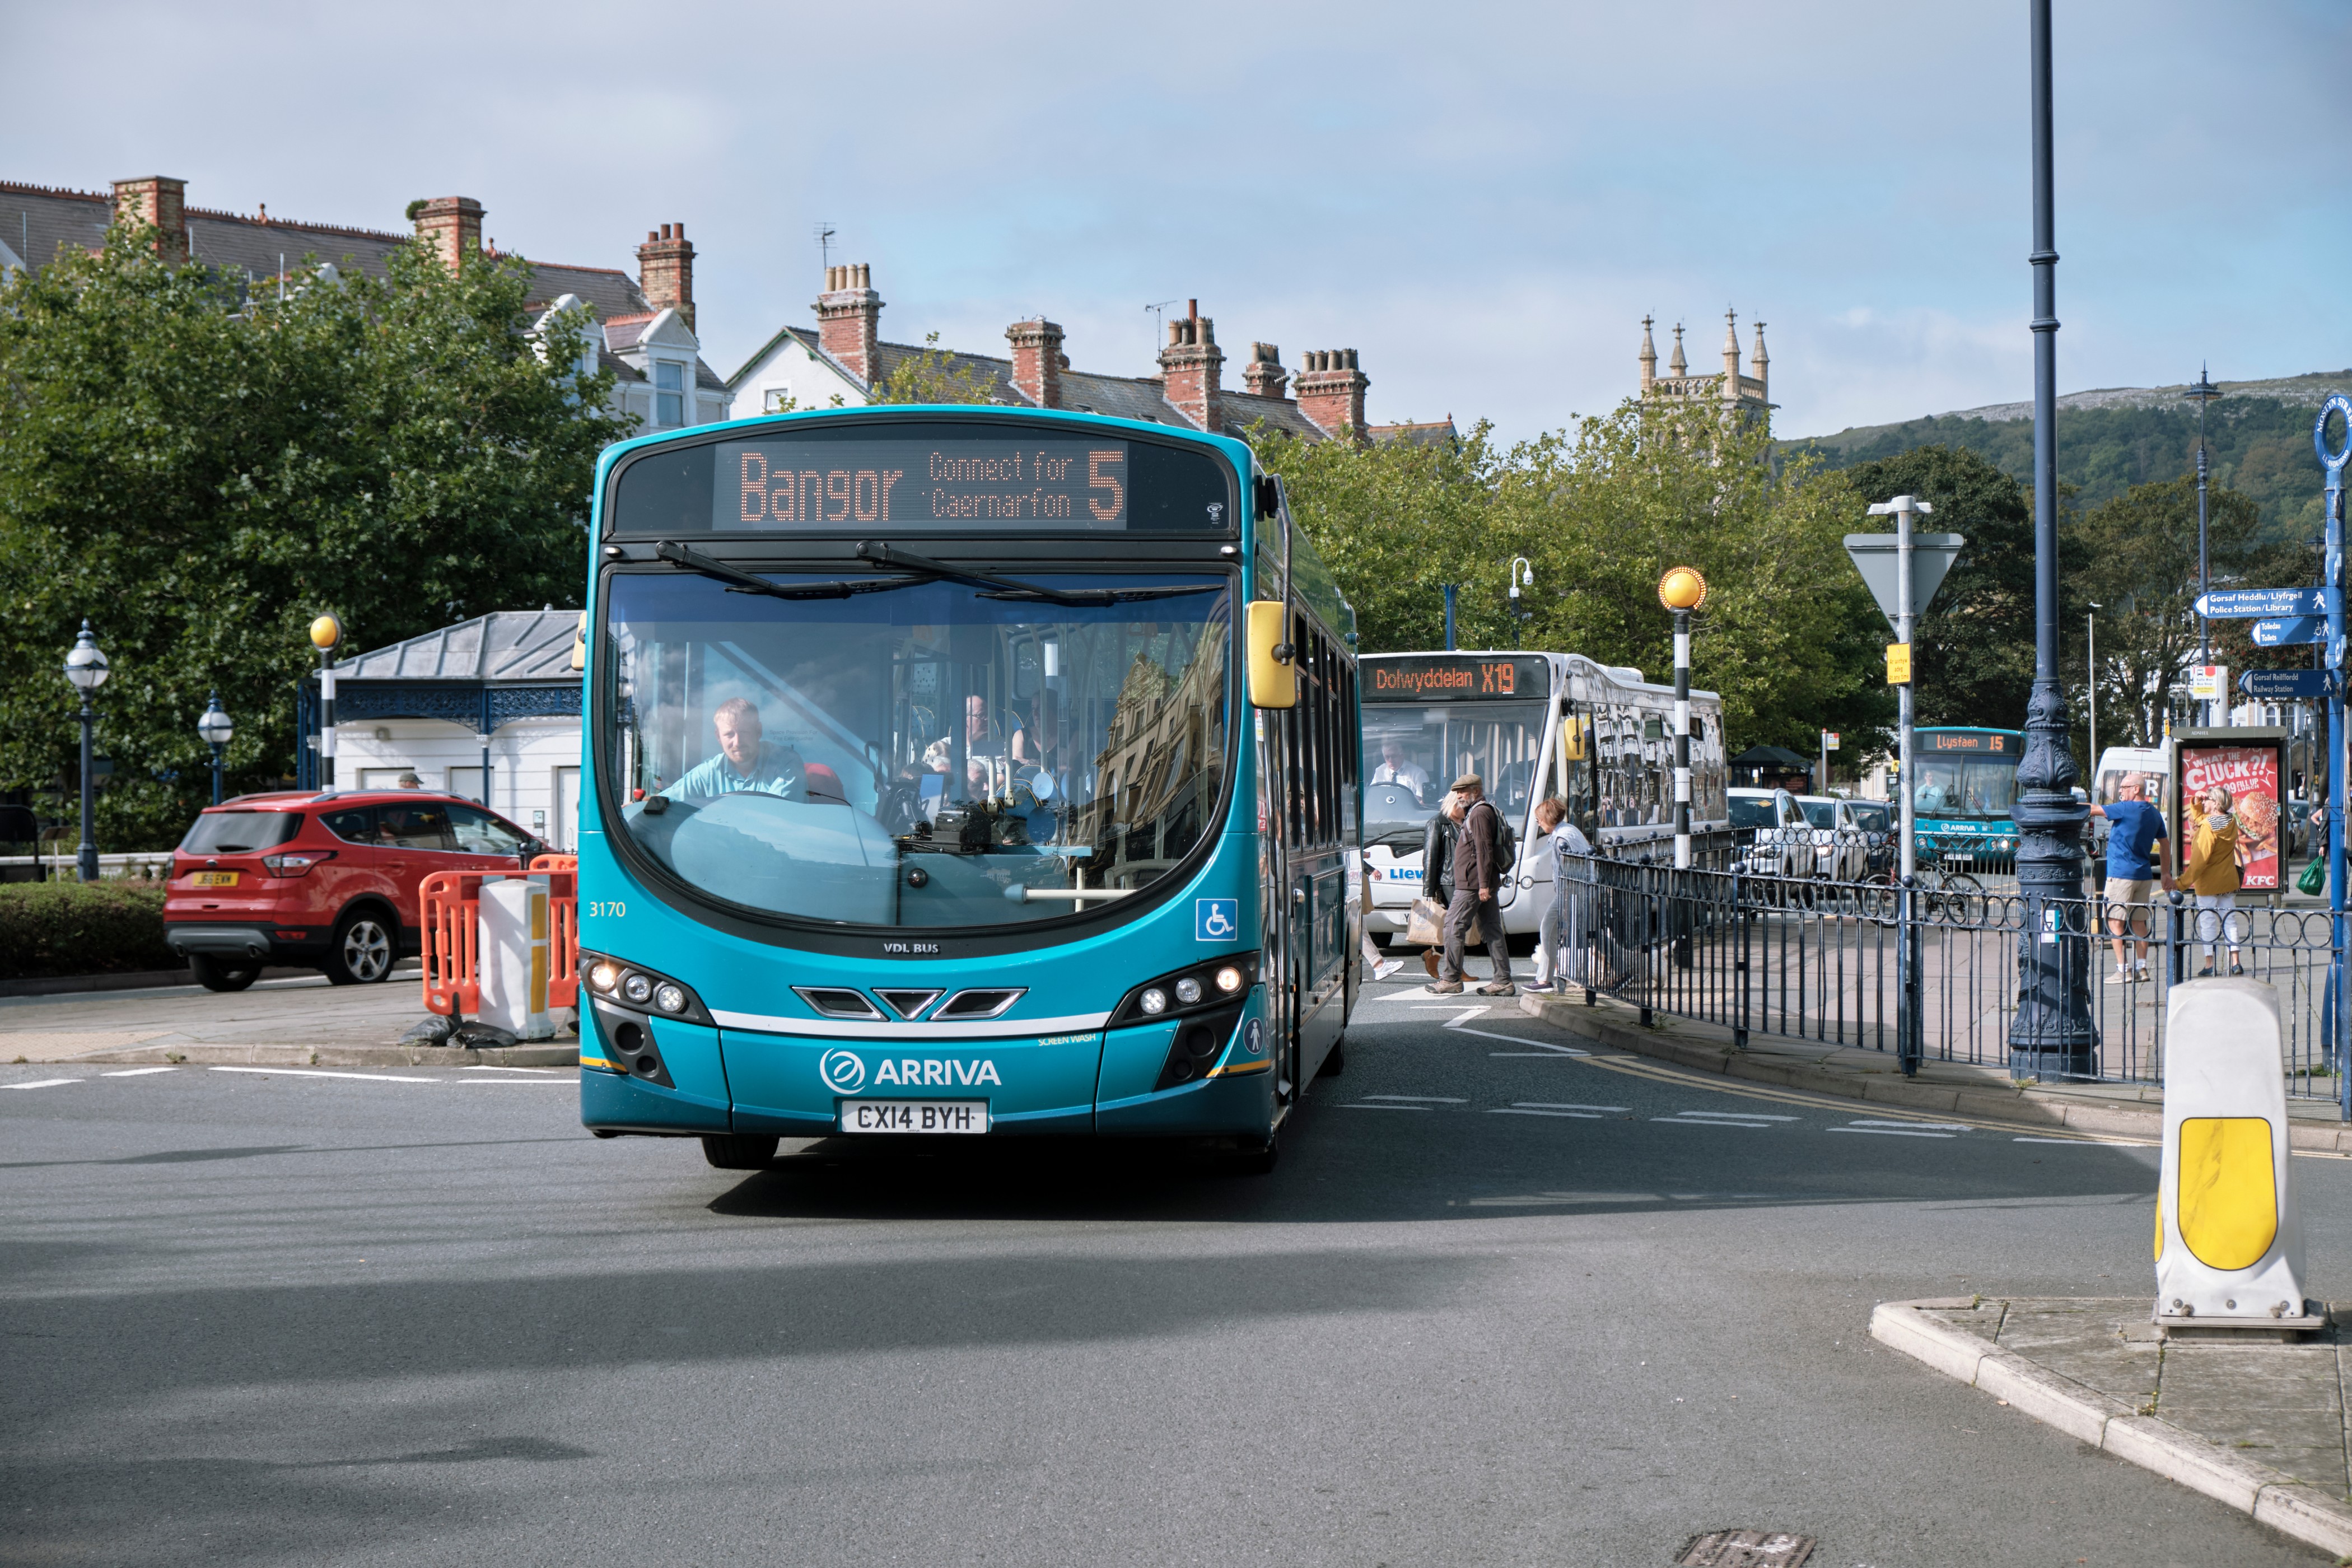 A bus leaving a bus station bound for Bangor in north Wales.